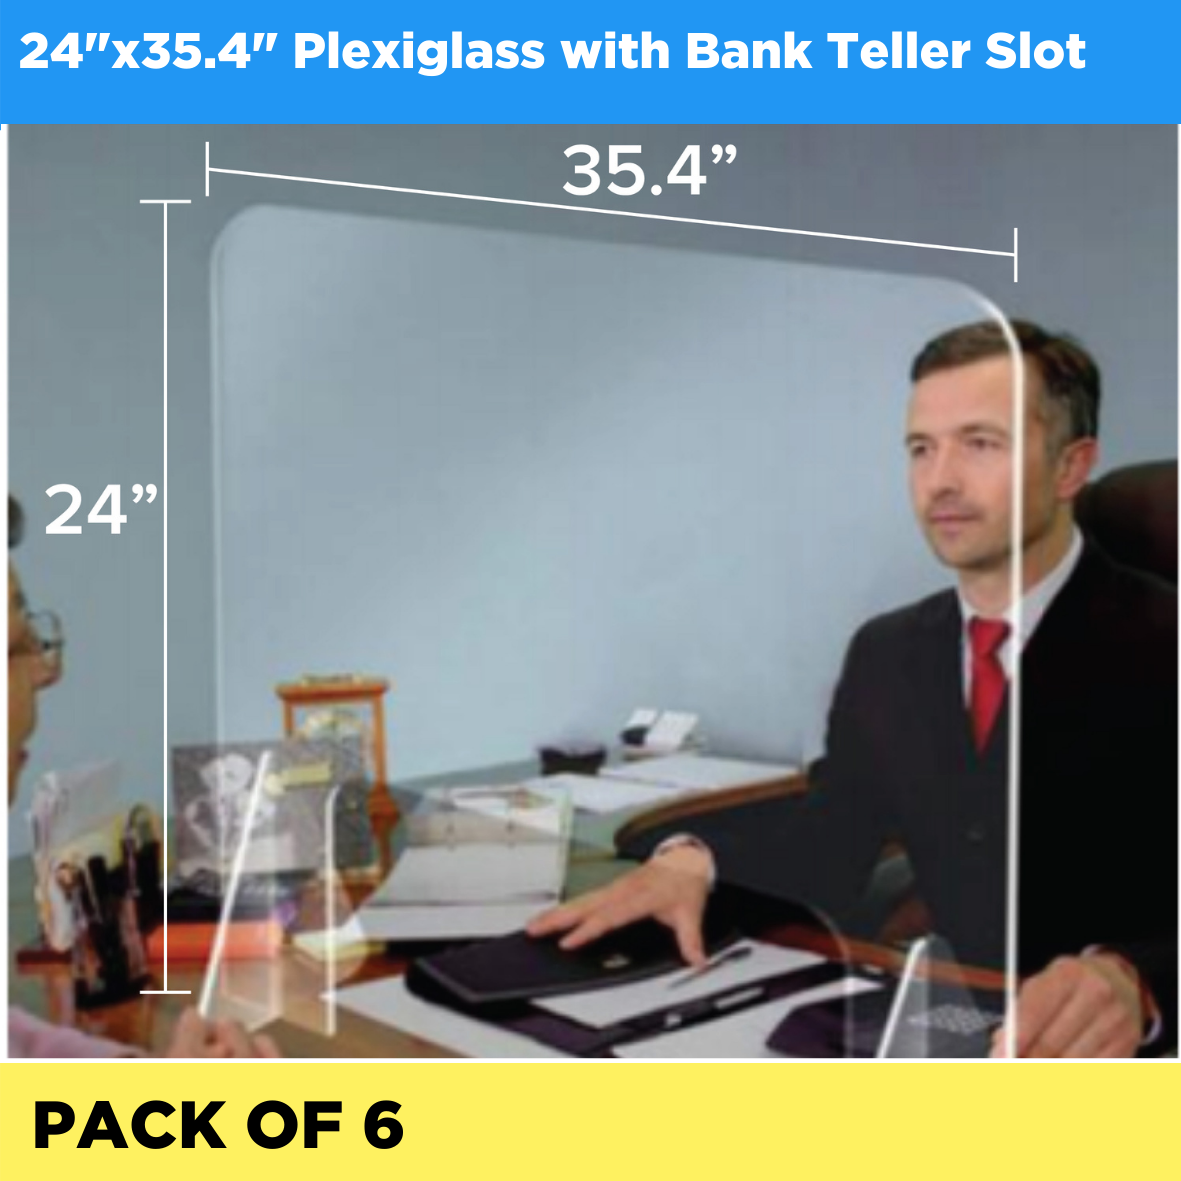 Plexiglass With Bank Teller Slot 24" x 35.4" - Pack of 6 (Listing ID: 6617450807365)